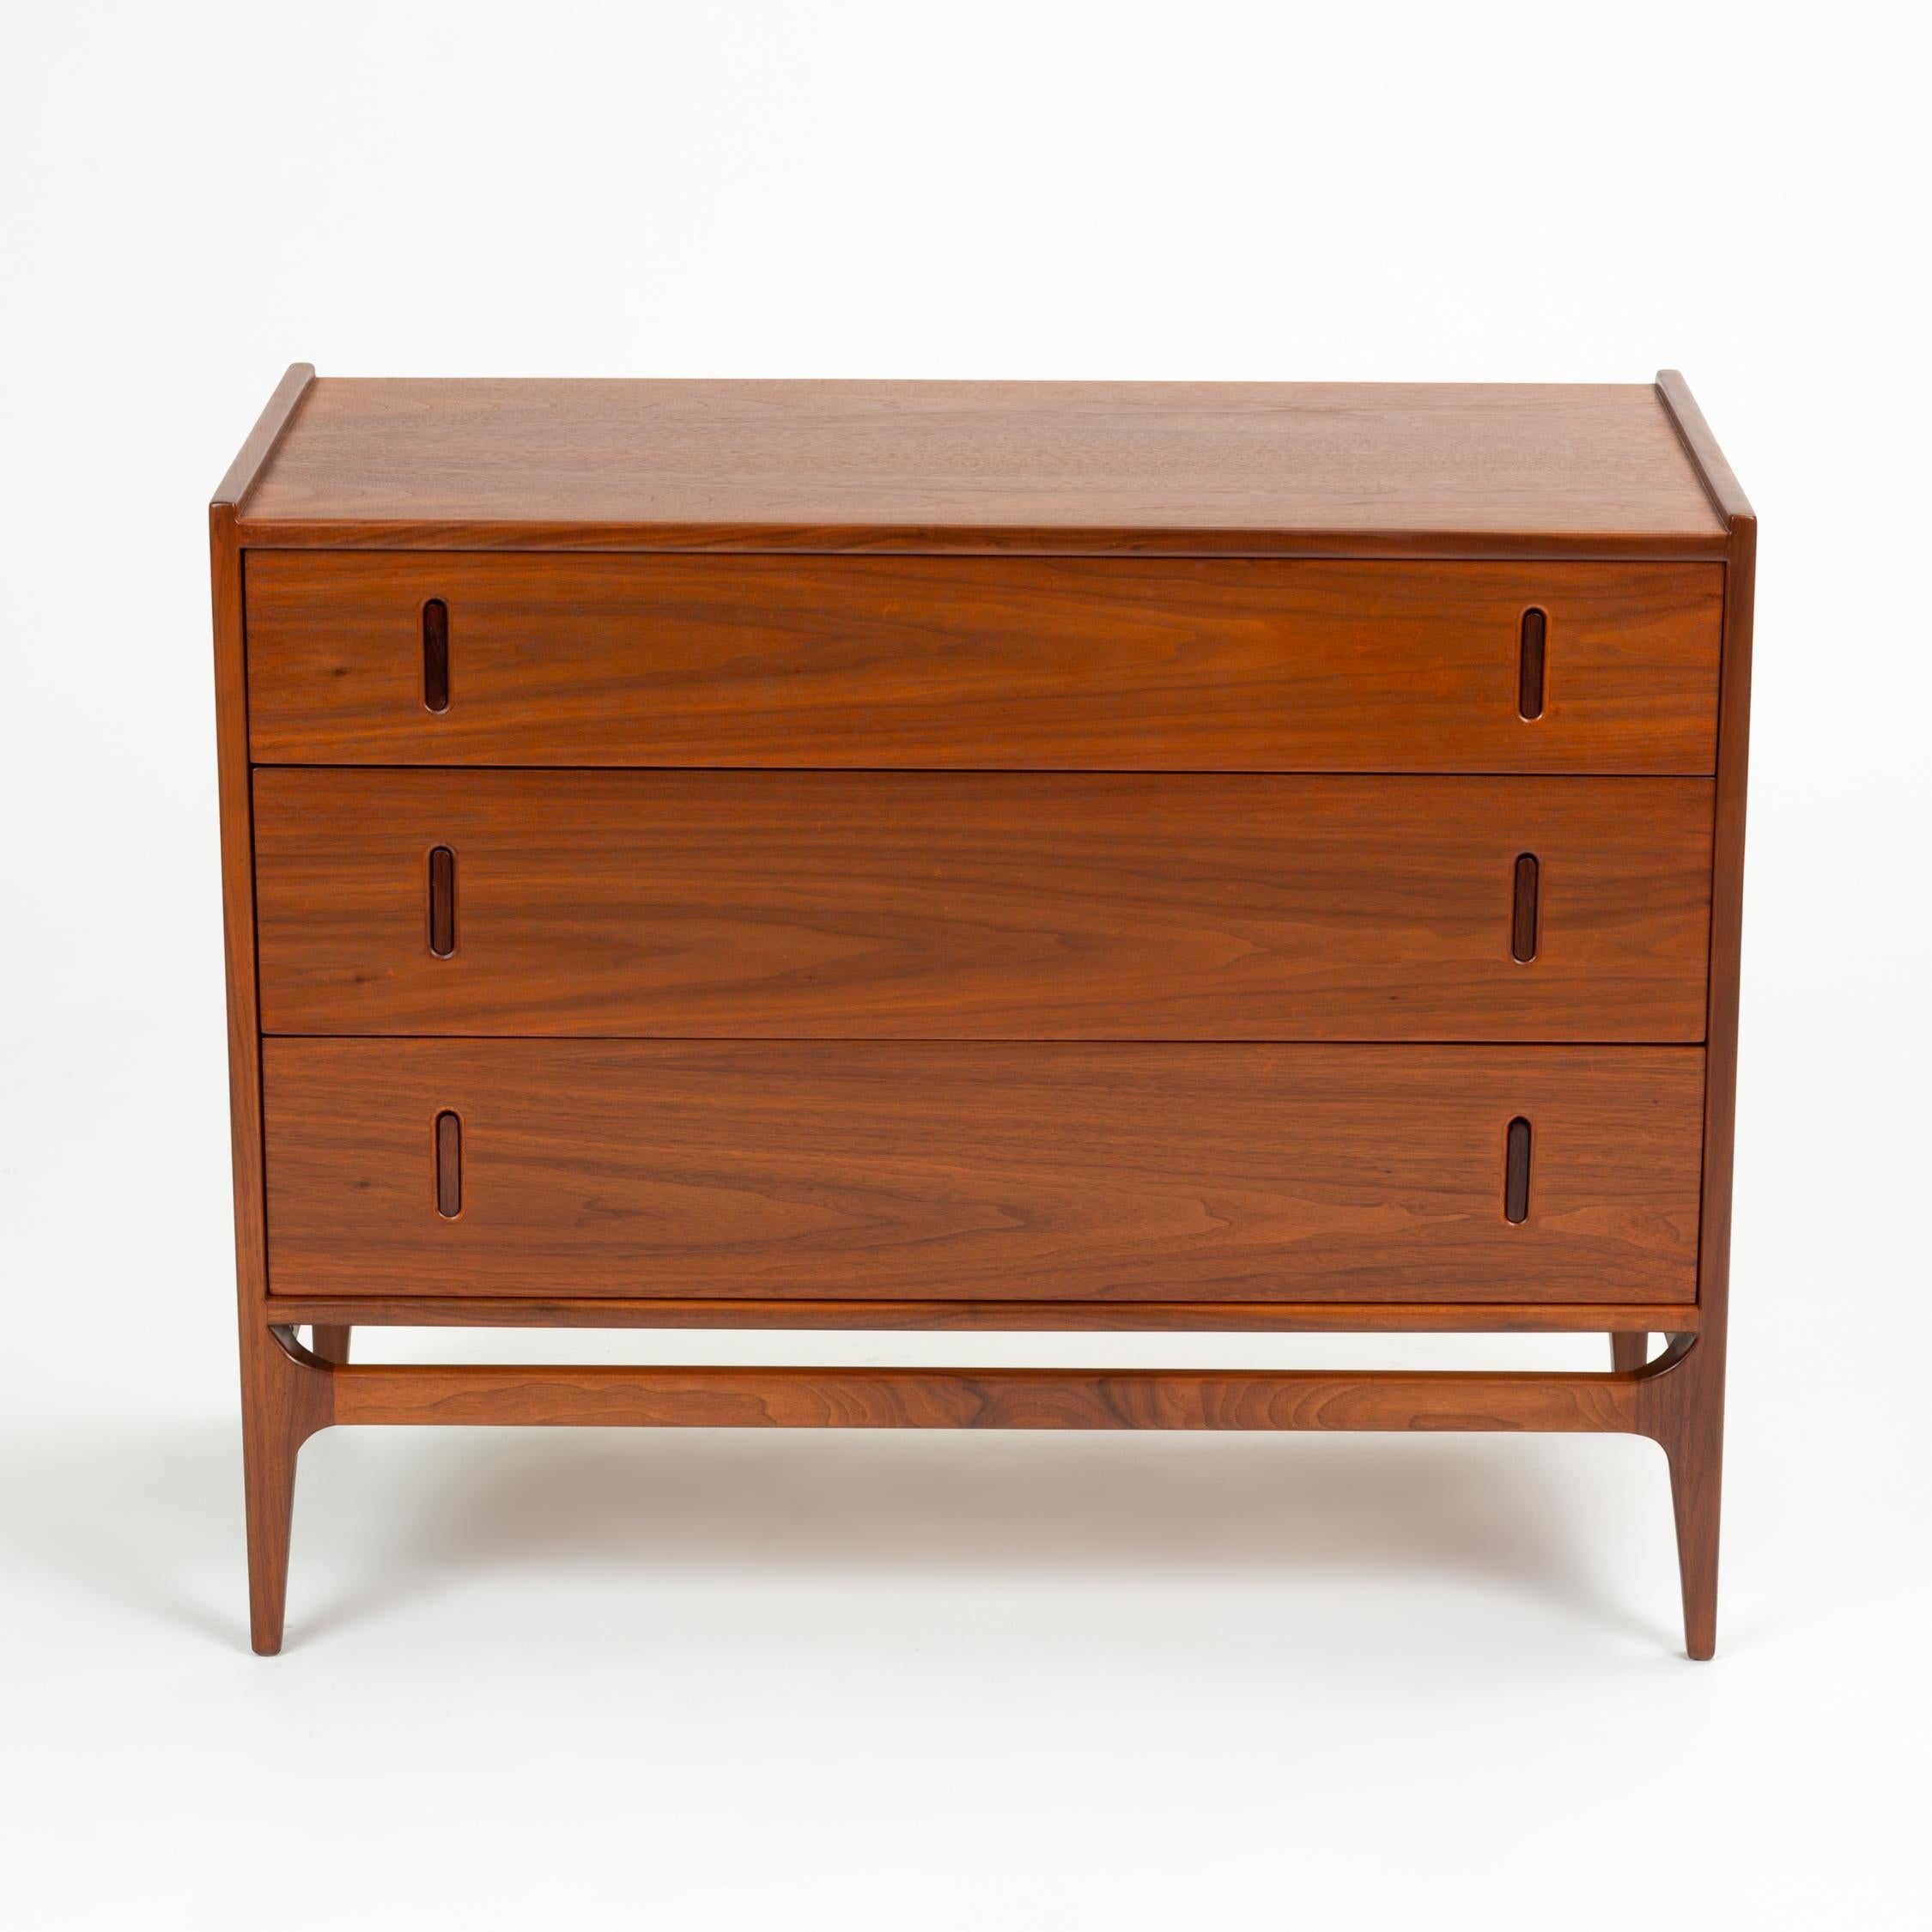 A compact dresser from Richard Thompson’s Baronet collection for Glenn of California. A stylish grouping in walnut, the Baronet case pieces are defined by their floating apron across the front two legs, raised end pieces on the case, and recessed